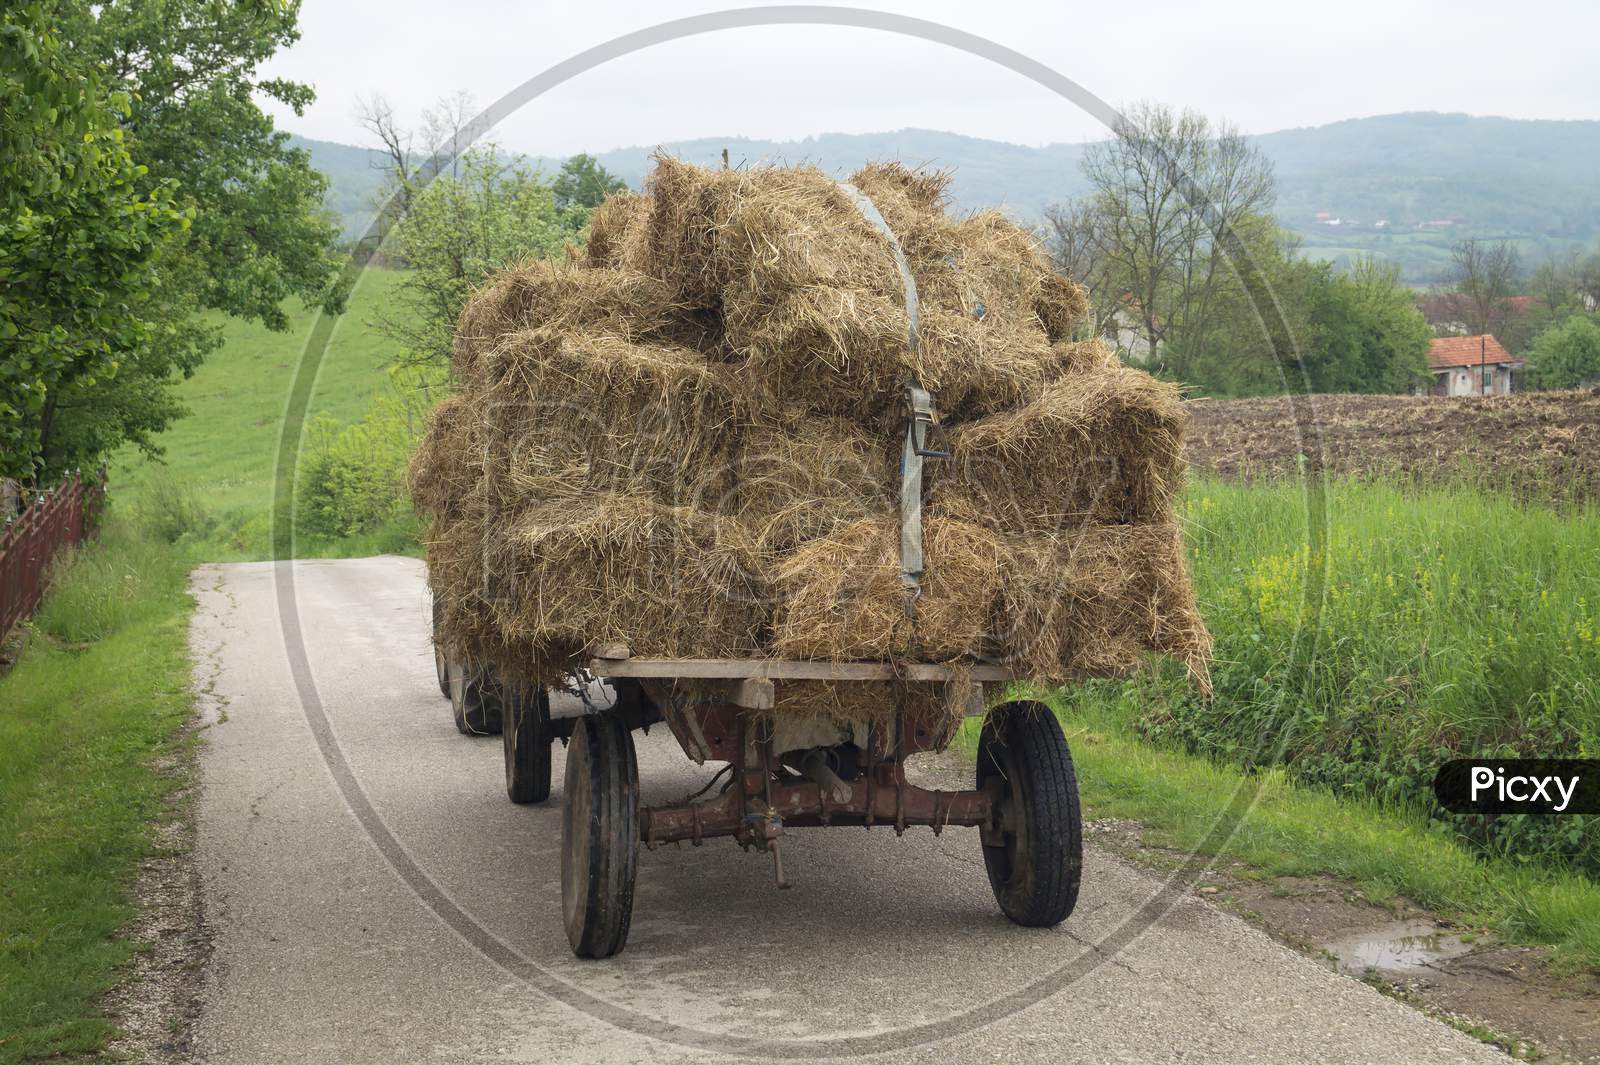 Bales Of Hay Stacked In The Cart.